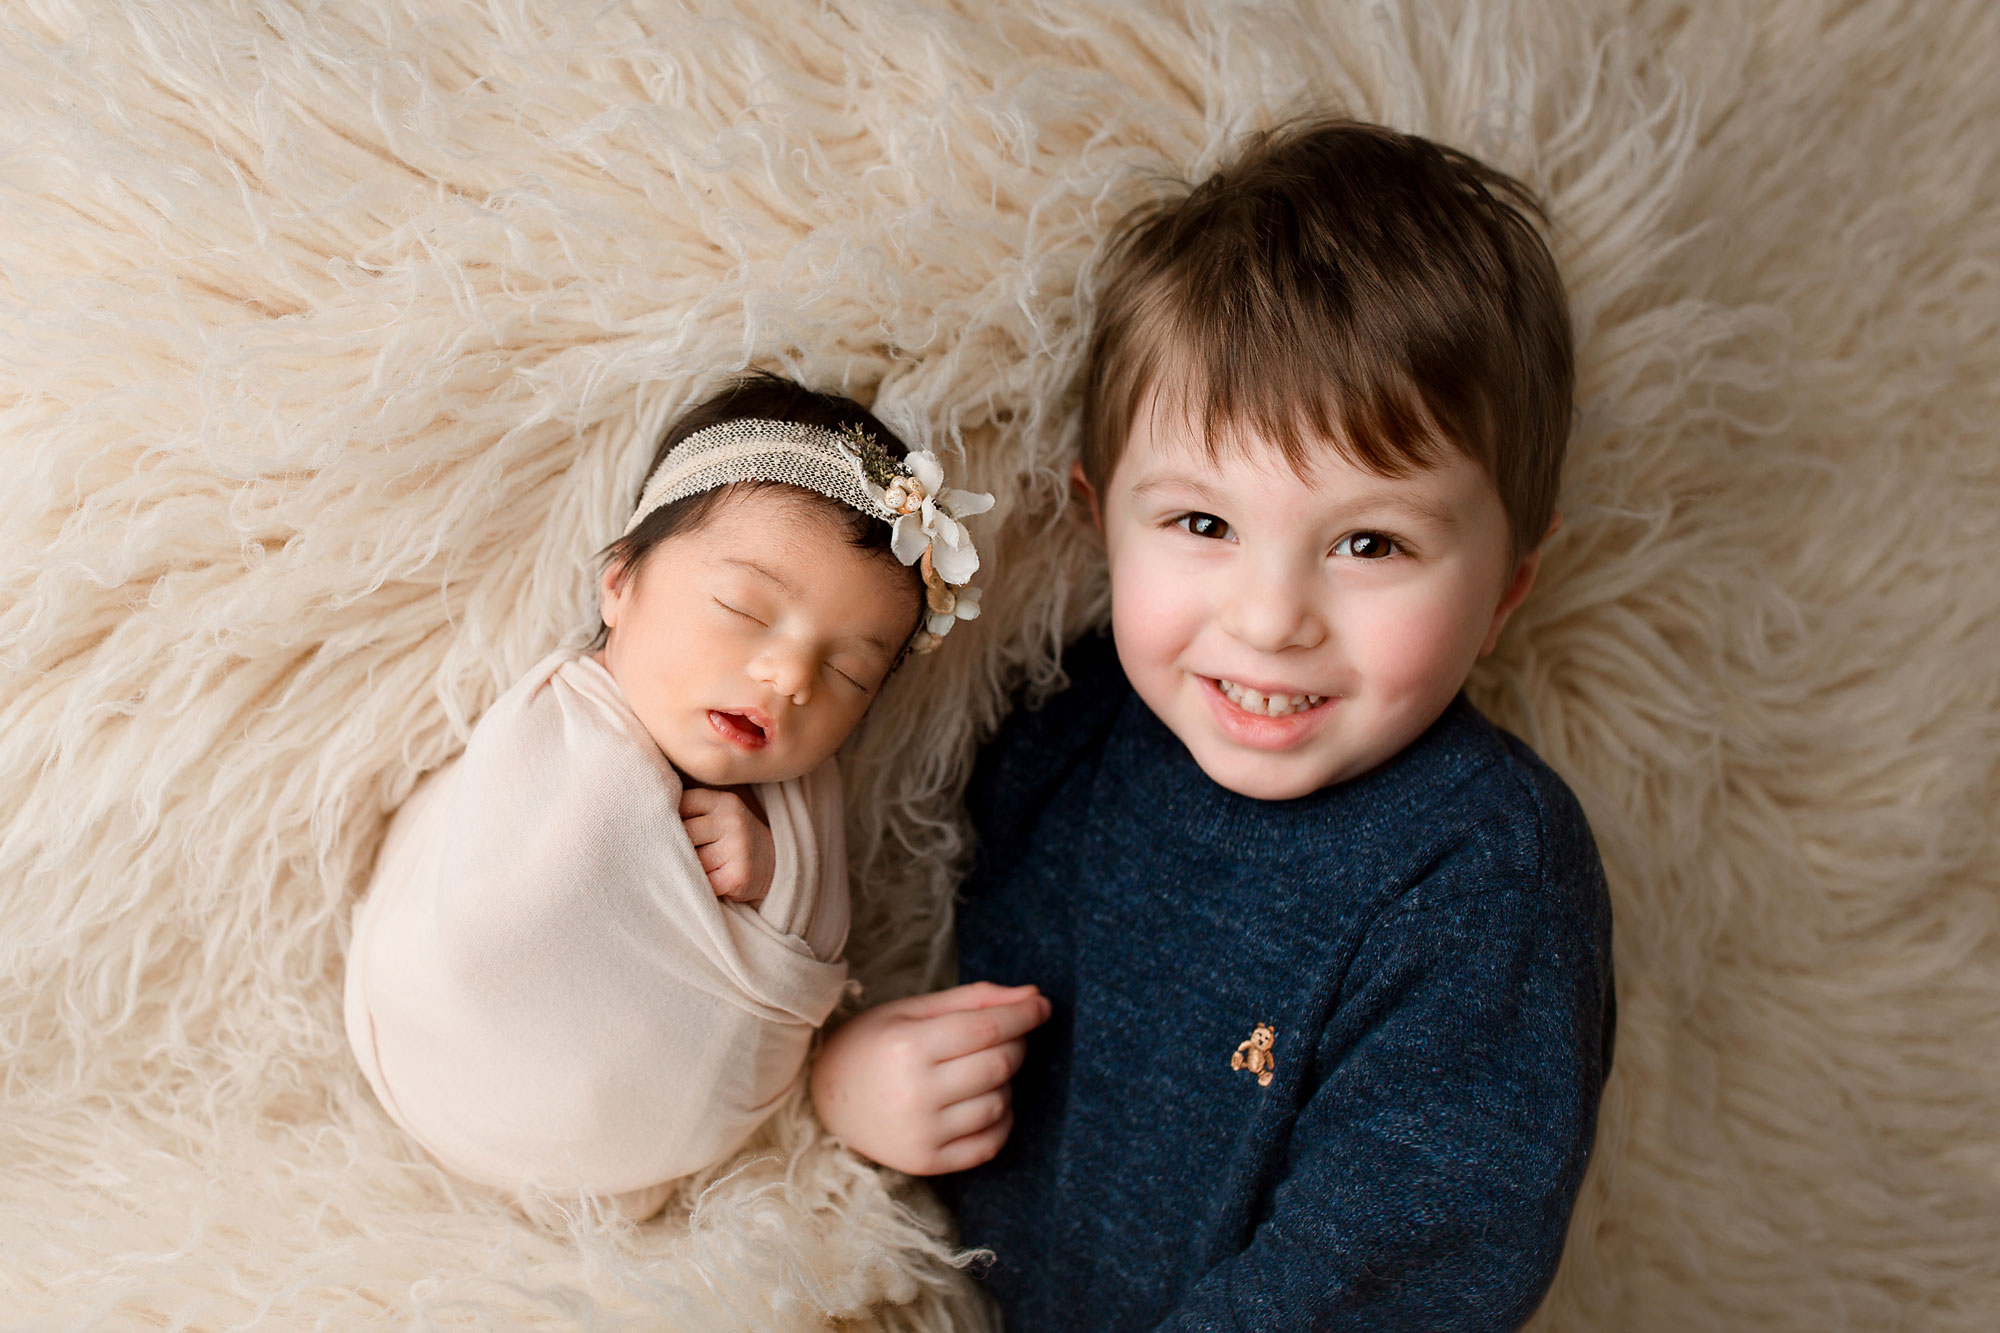 Passaic county newborn photographer photos of baby and older brother